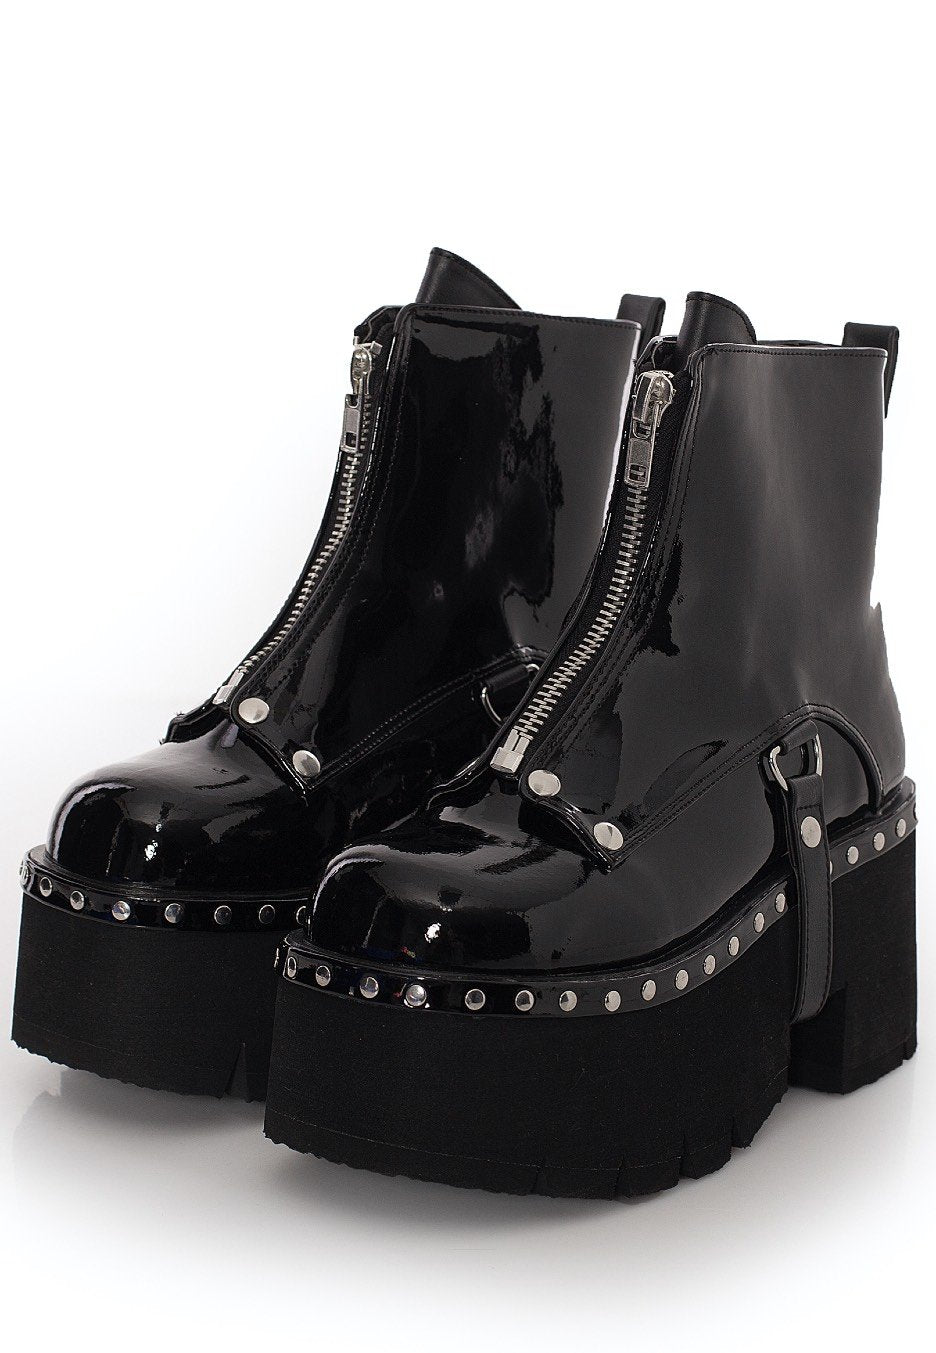 DemoniaCult - Ashes 100 Metal Front Zip Patent Vegan Leather - Girl Shoes